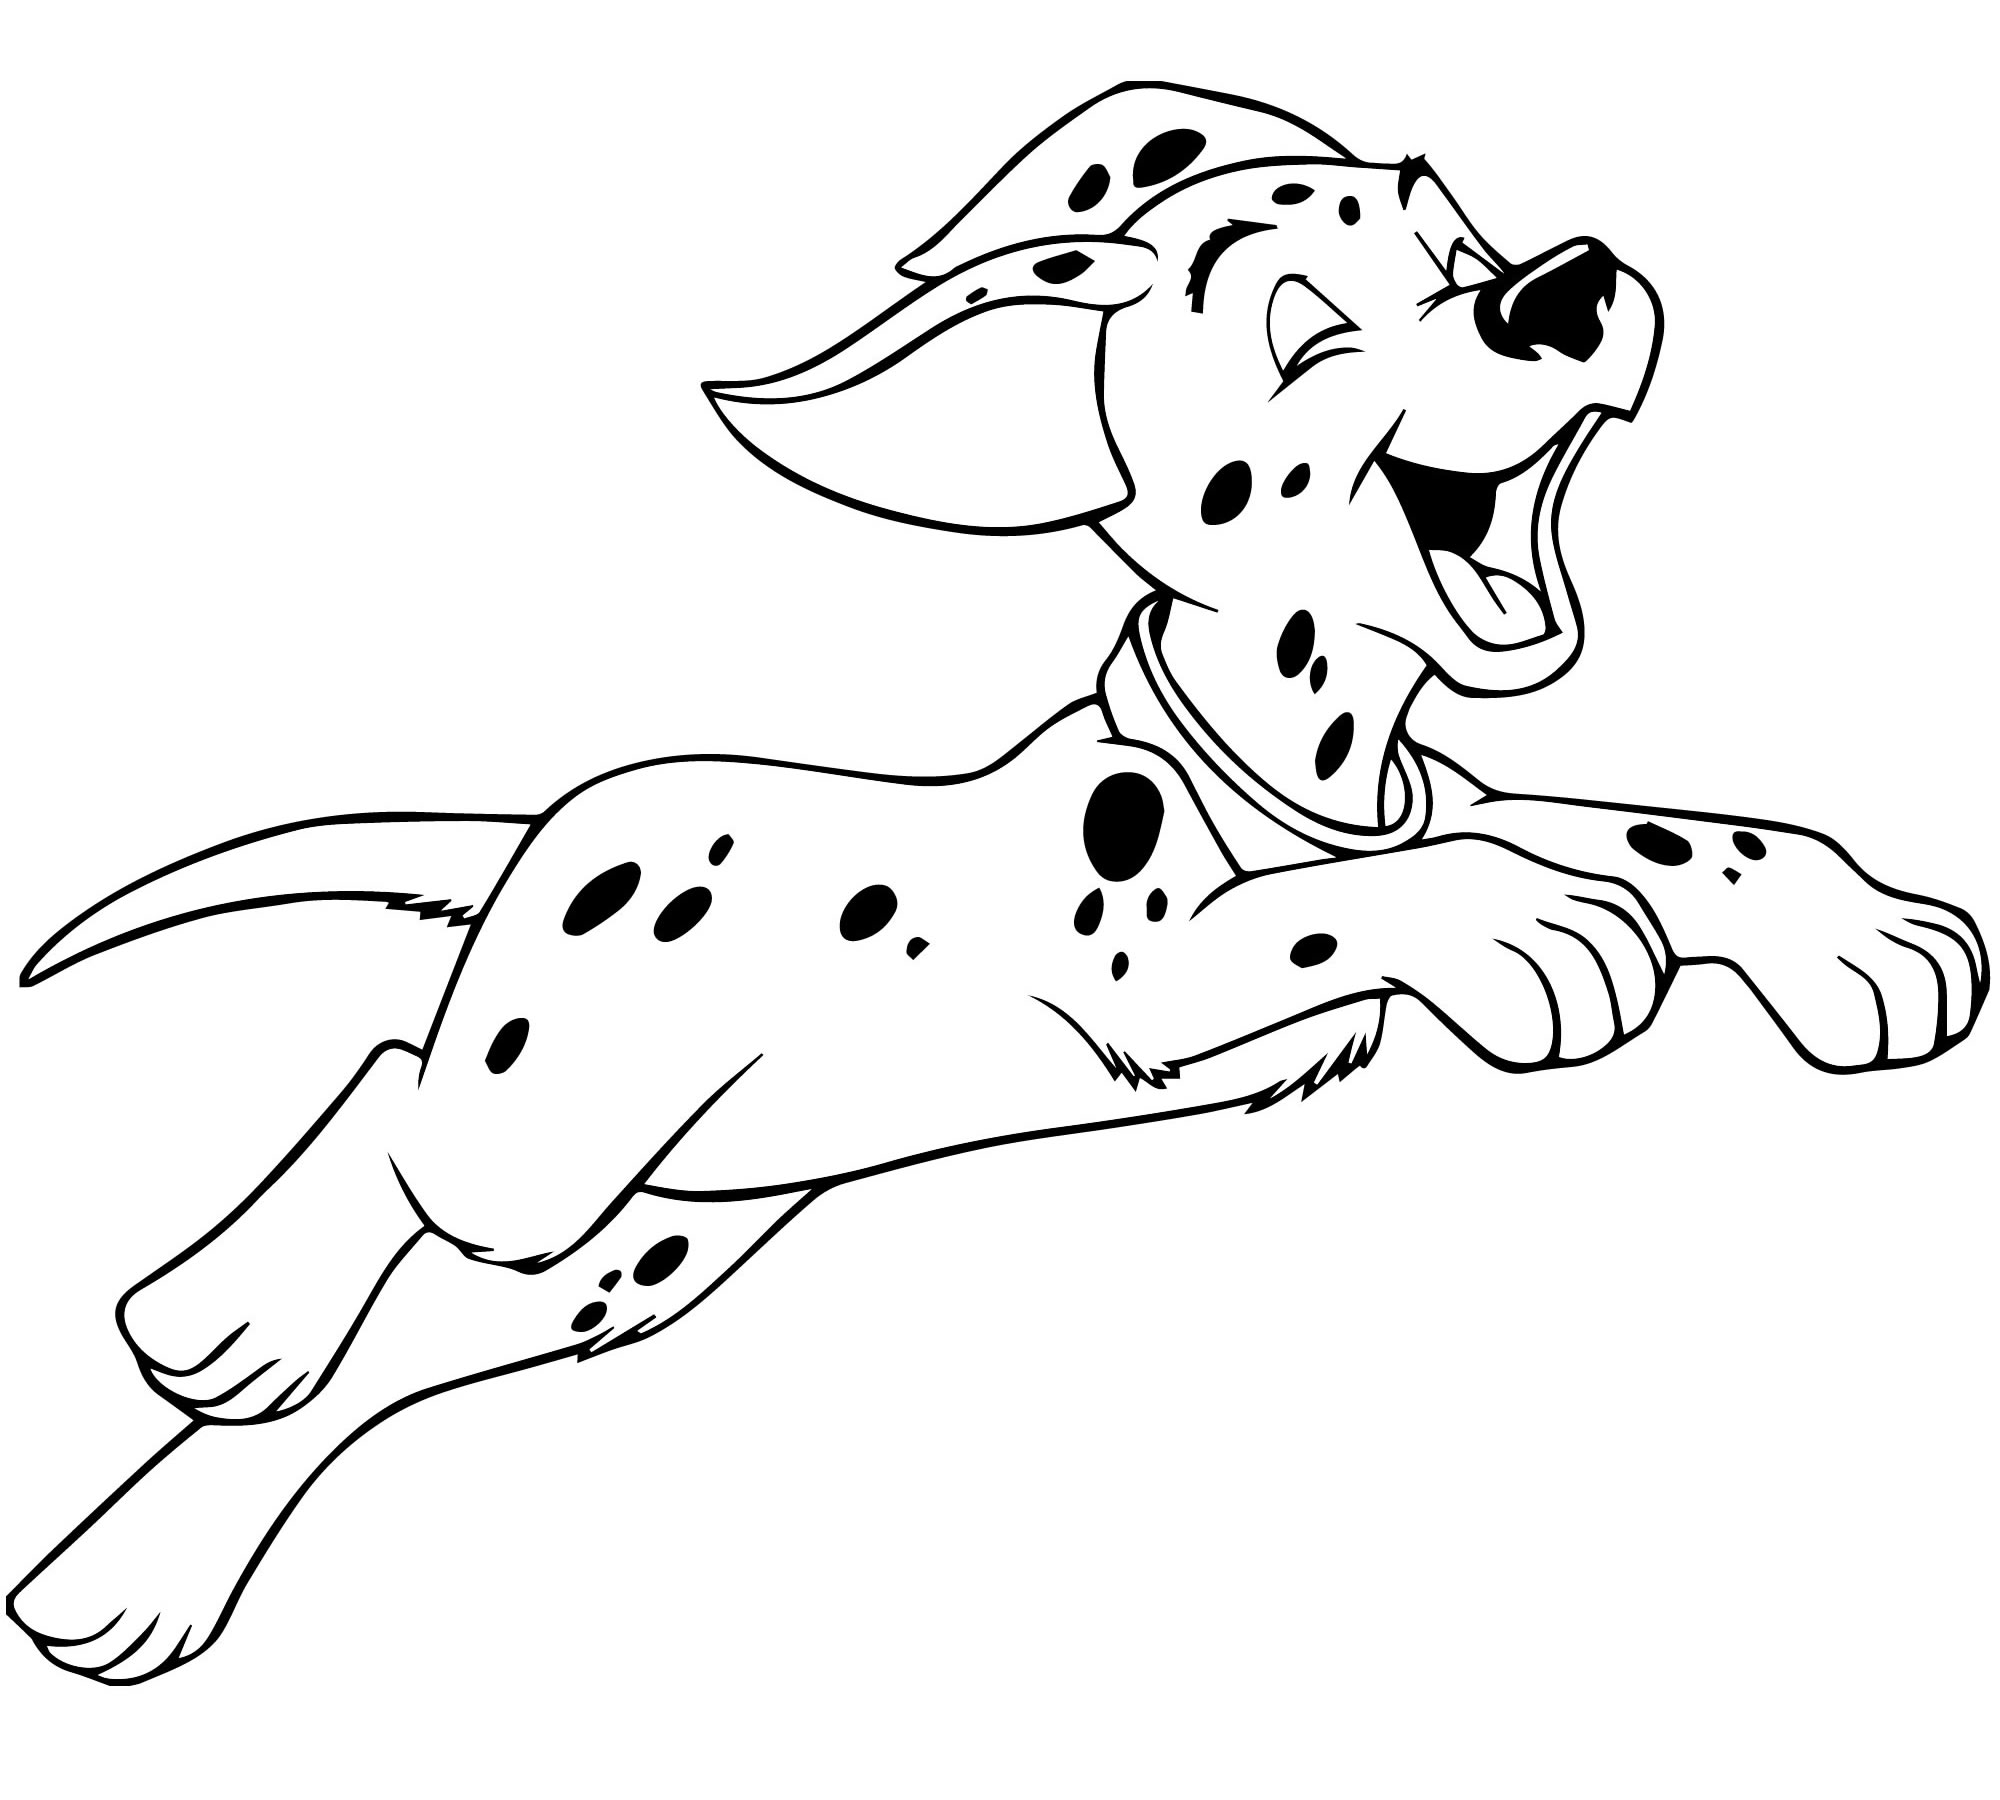 Creative coloring page 101